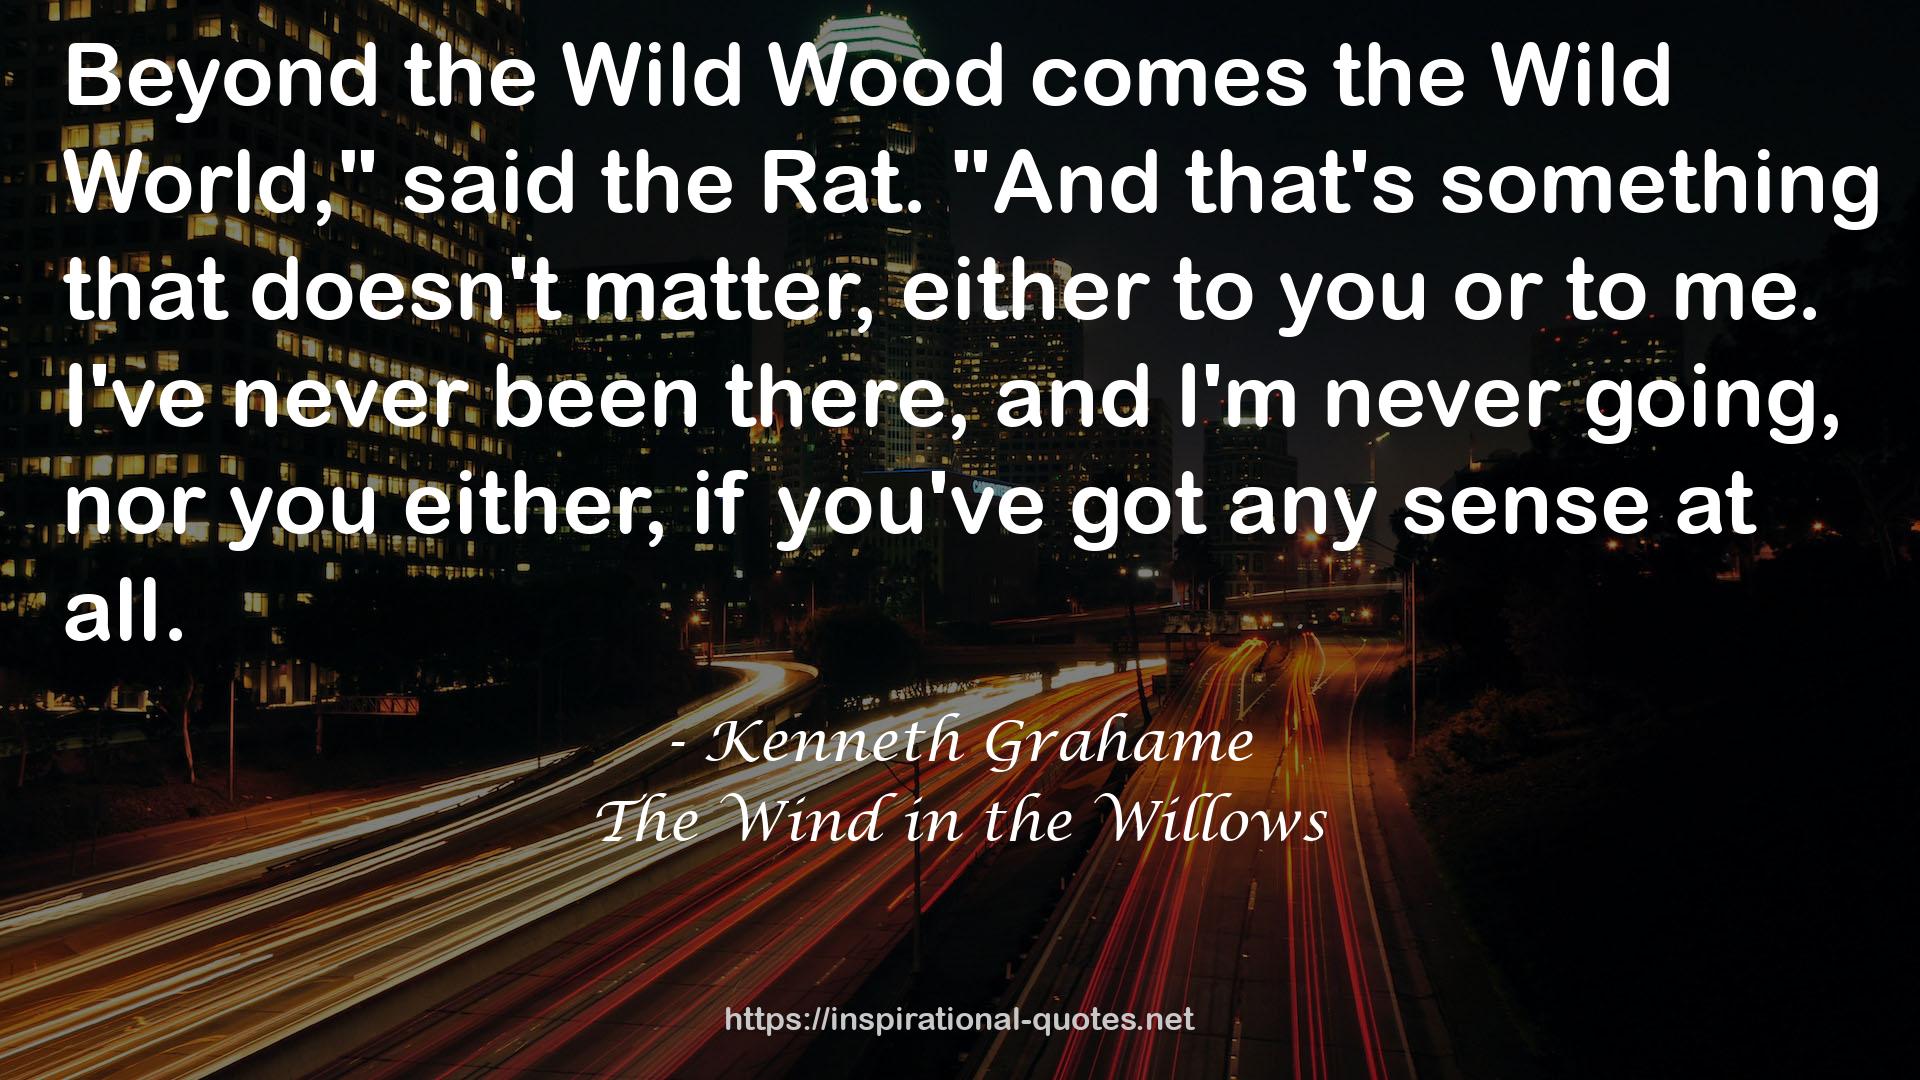 Kenneth Grahame QUOTES